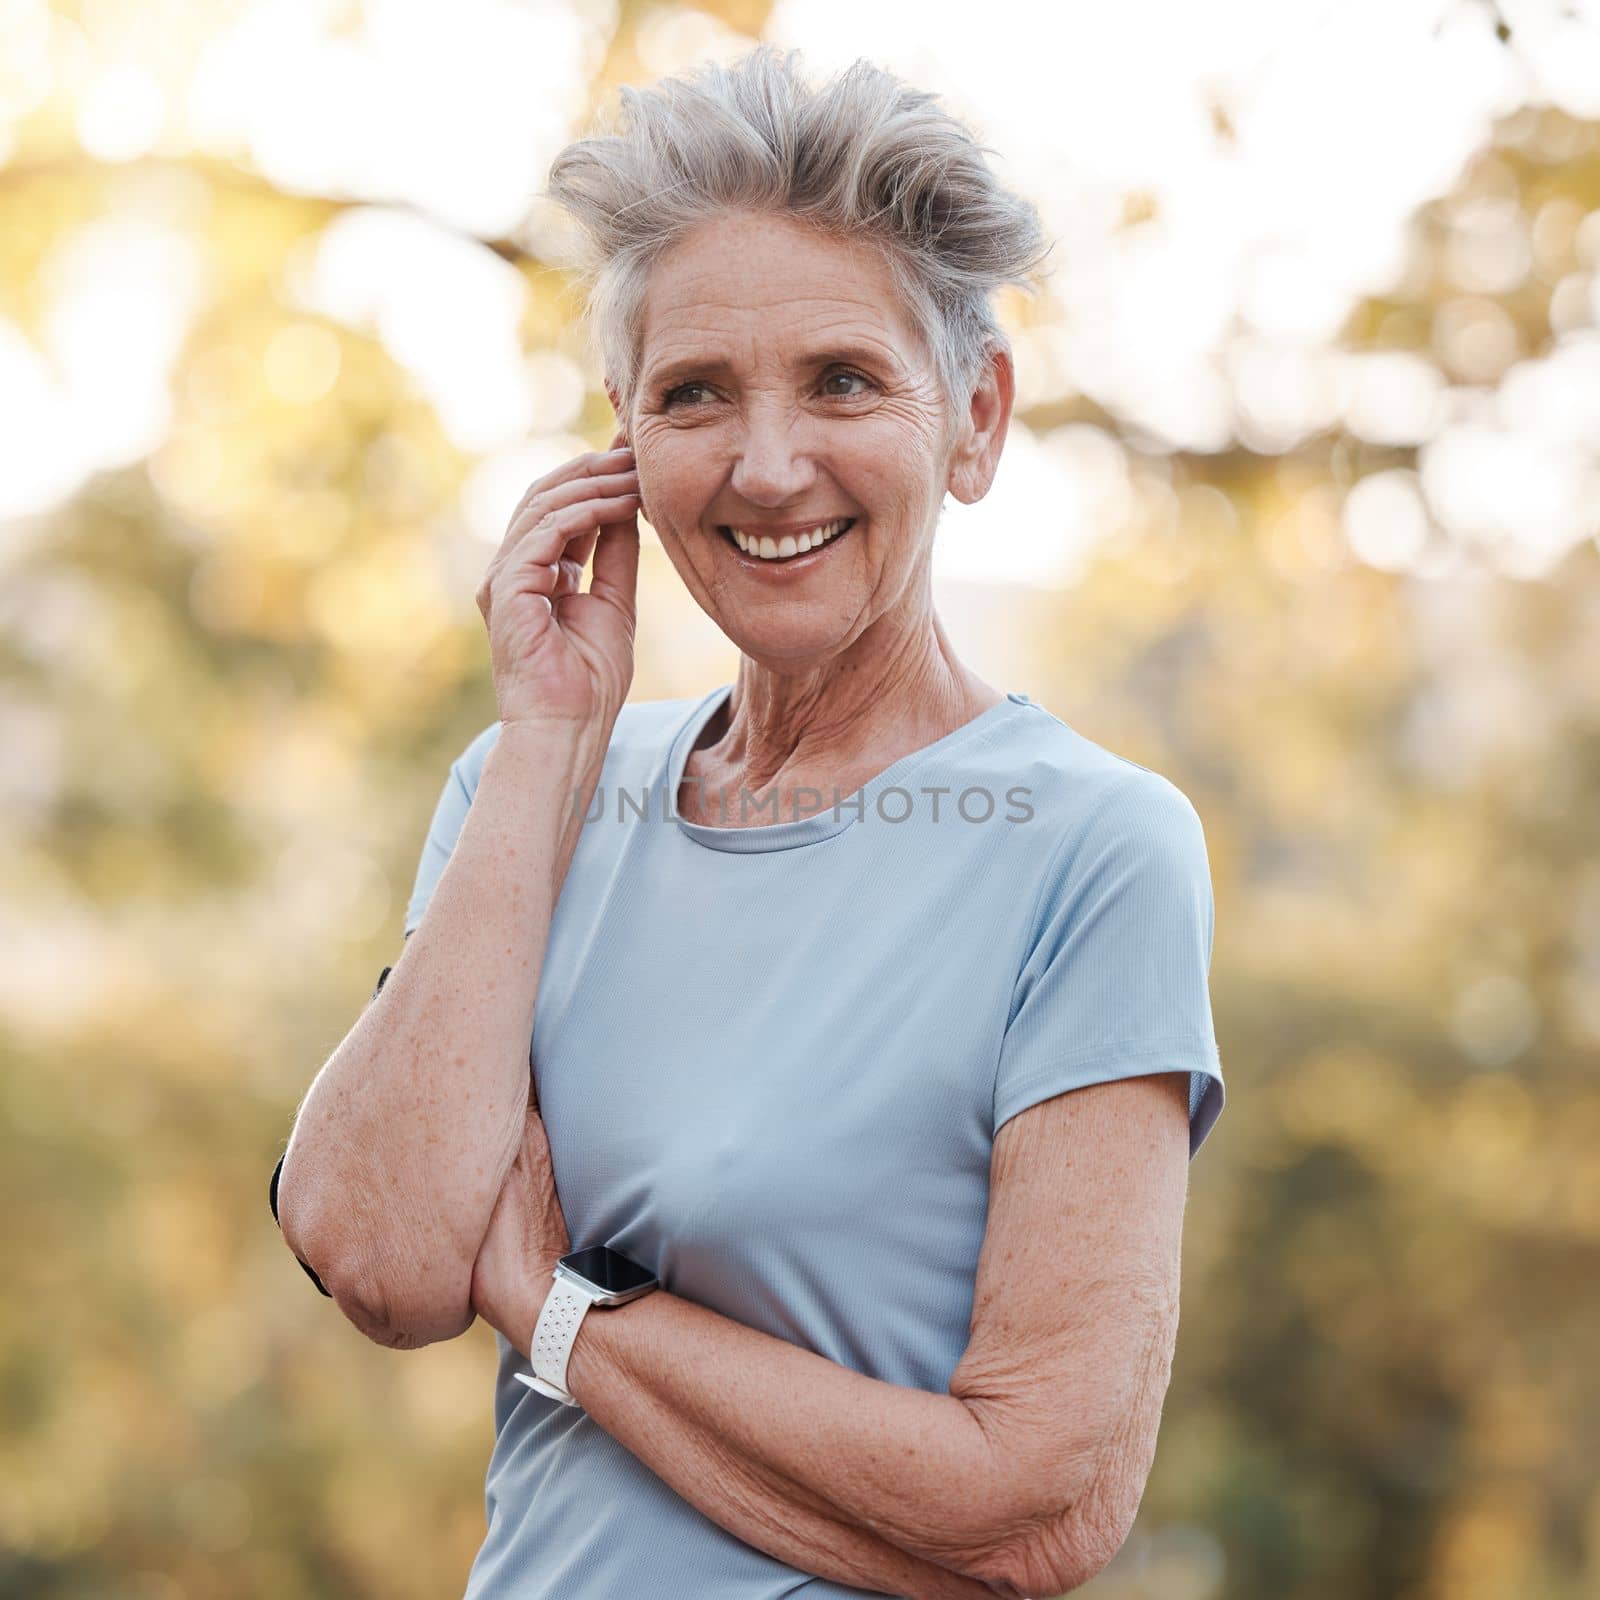 Senior woman, happy and smile for outdoor exercise, healthy fitness workout and lifestyle motivation in nature park. Elderly person, happiness and cardio wellness training with bokeh background.